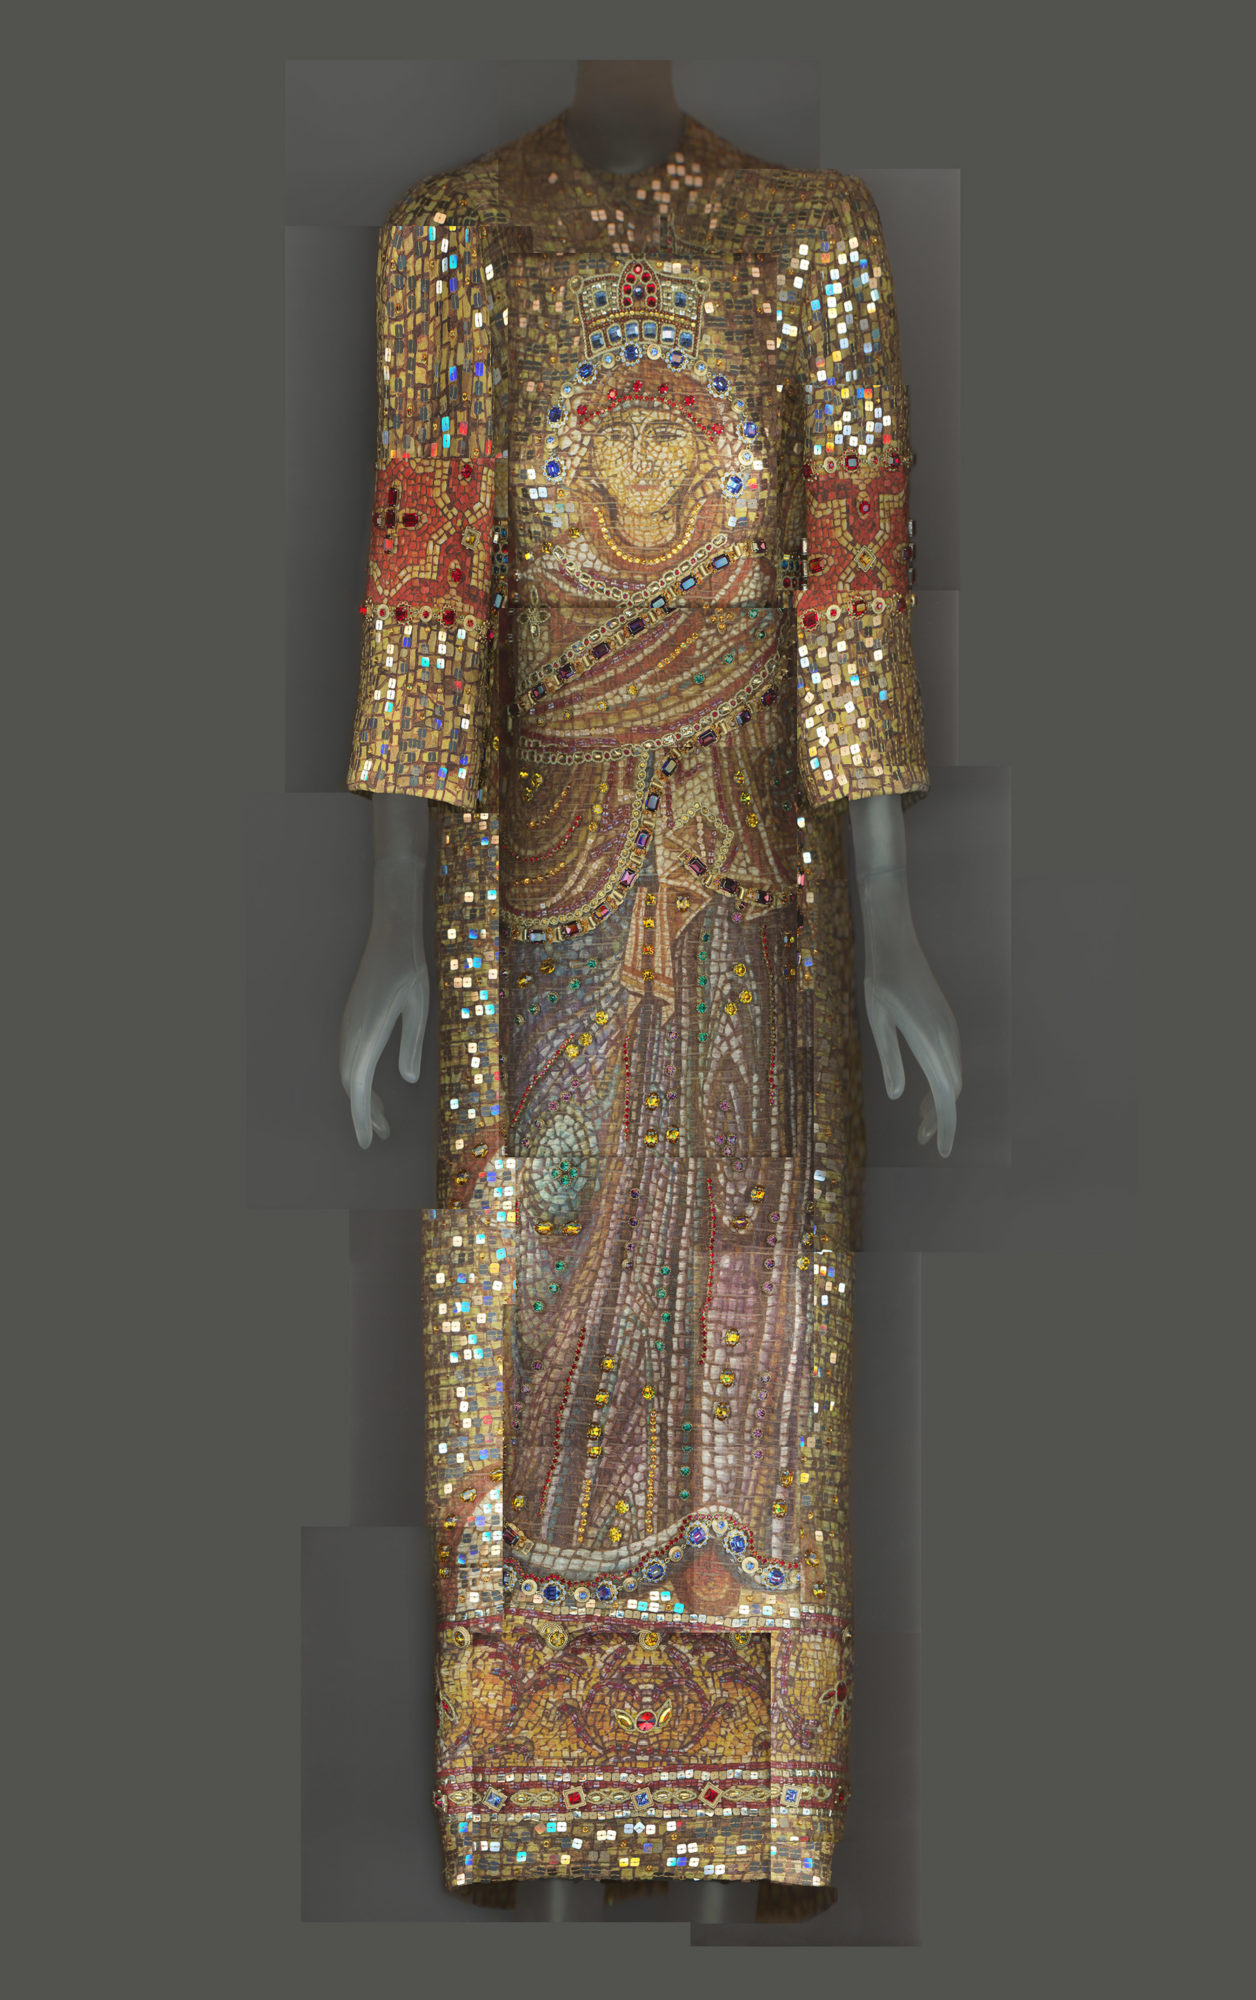 gold and colorful gown with three quarter-length sleeves and a mosaic pattern with the image of a saint over the torso and legs